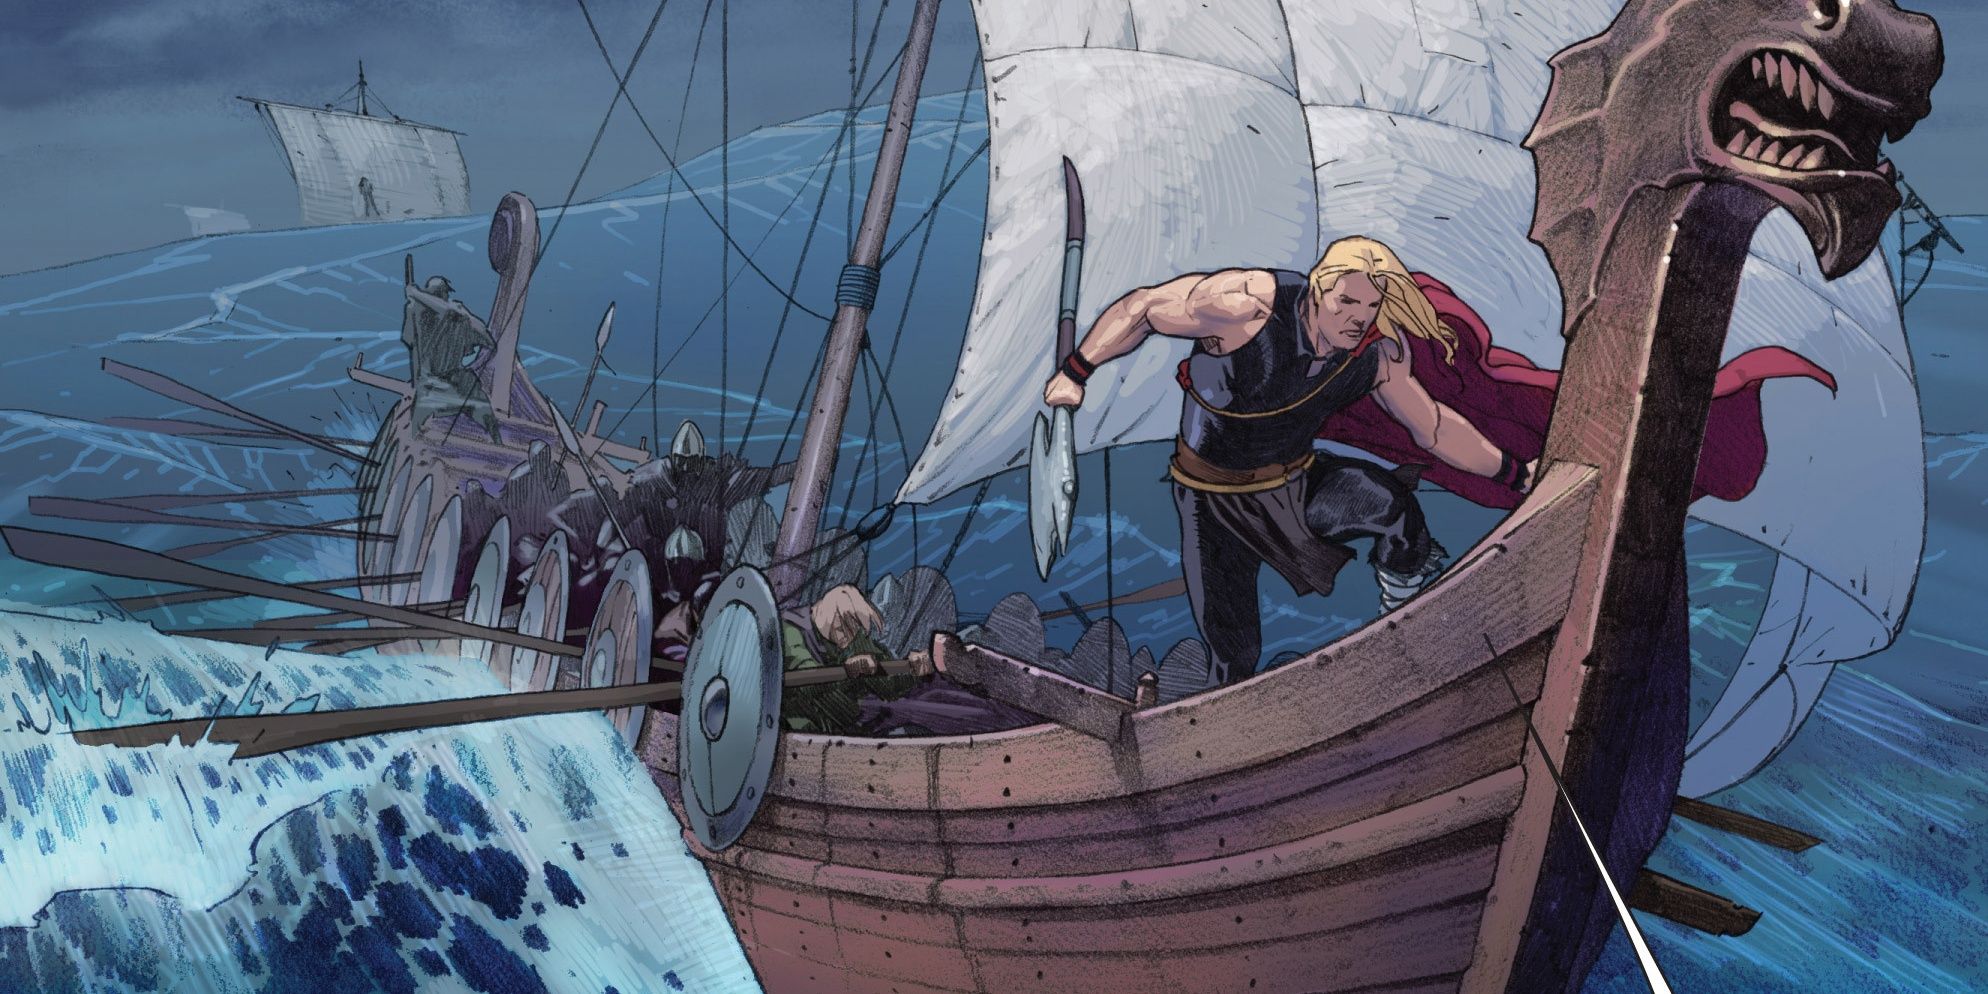 thor on a ship with vikings